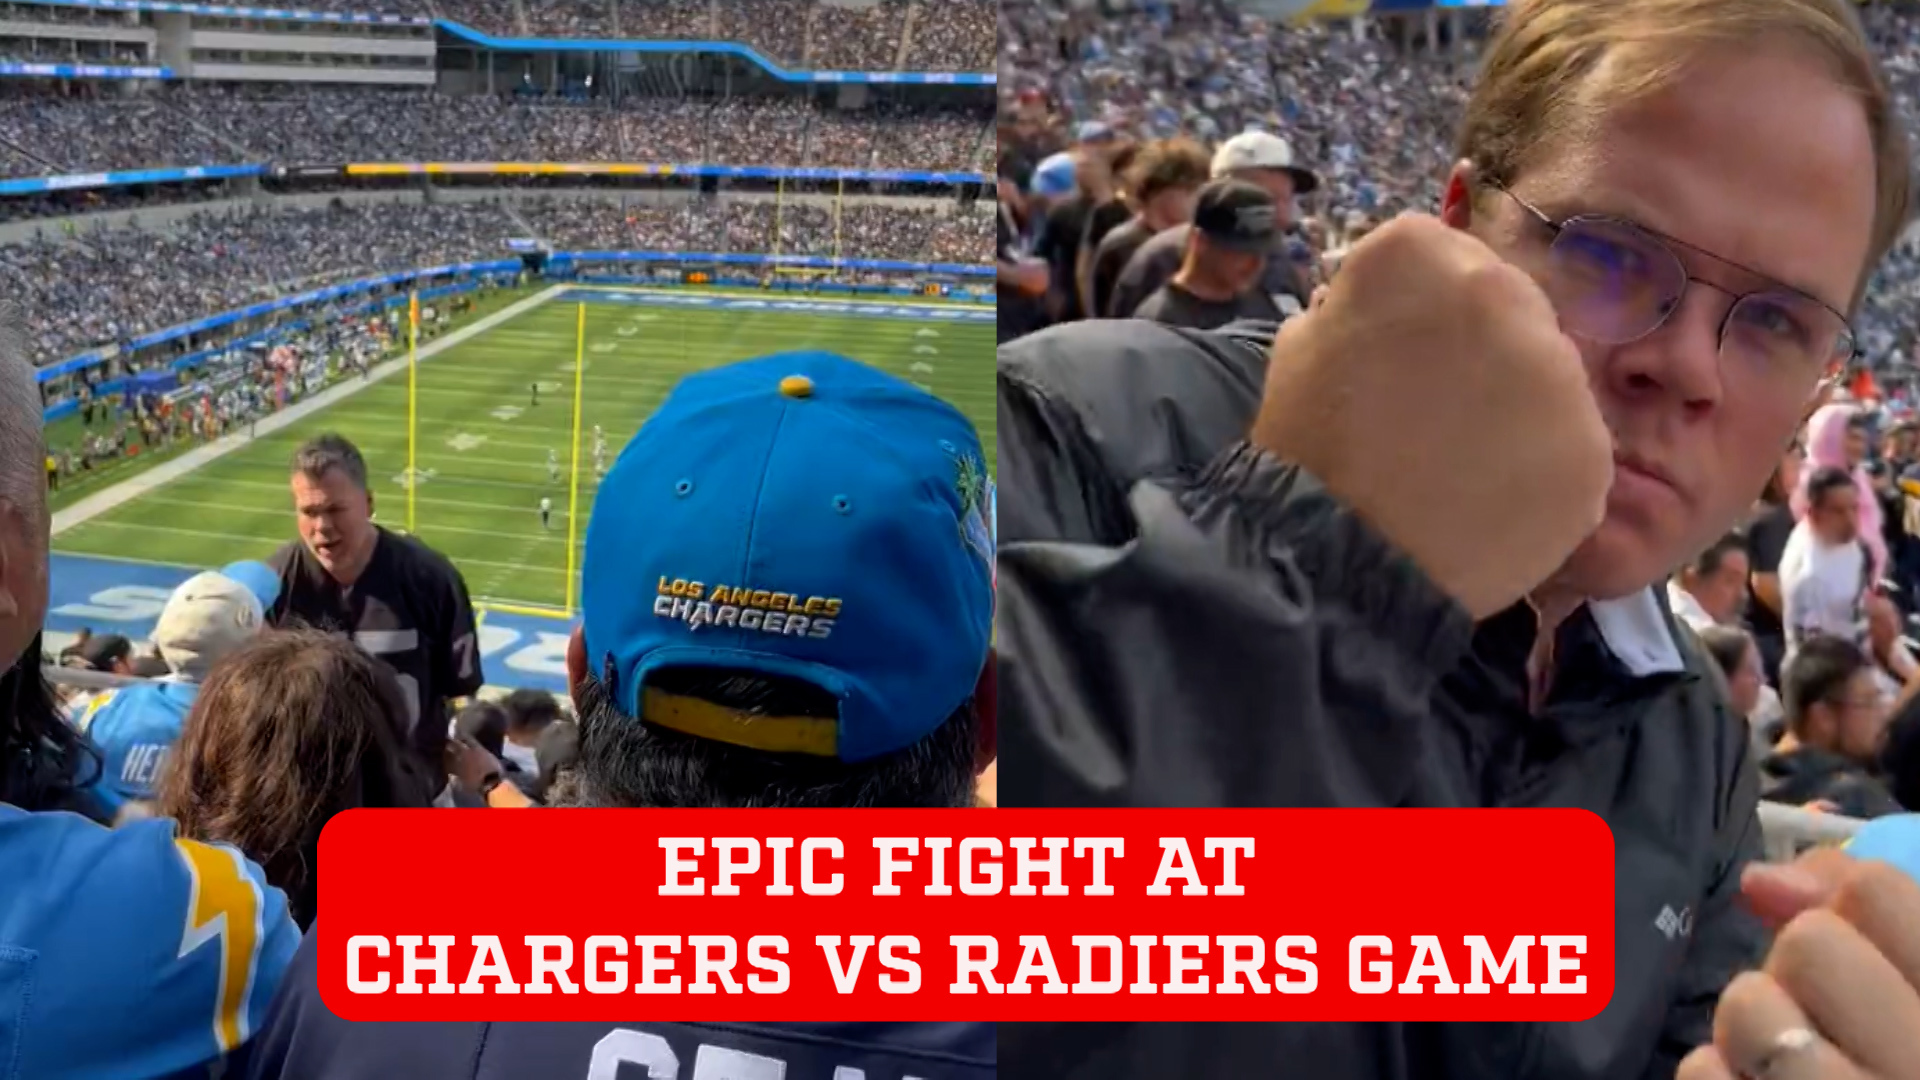 Man sent tumbling downstairs during epic fan 'boxing match' at Chargers vs Raiders game